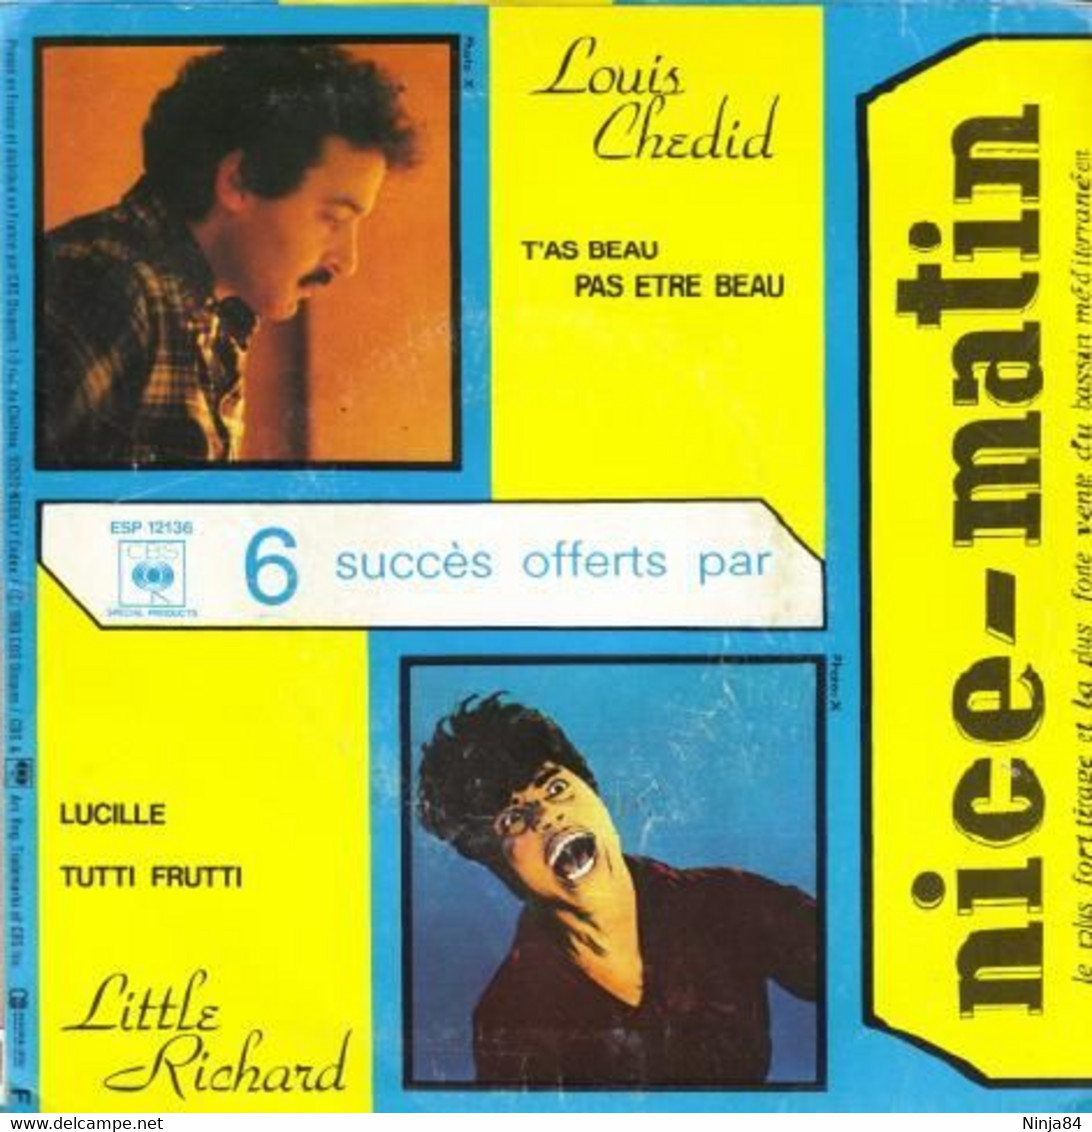 EP 45 RPM (7")  Julie Piétri / Little Richard / Louis Chedid  "  Magdalena  "  Promo - Collector's Editions